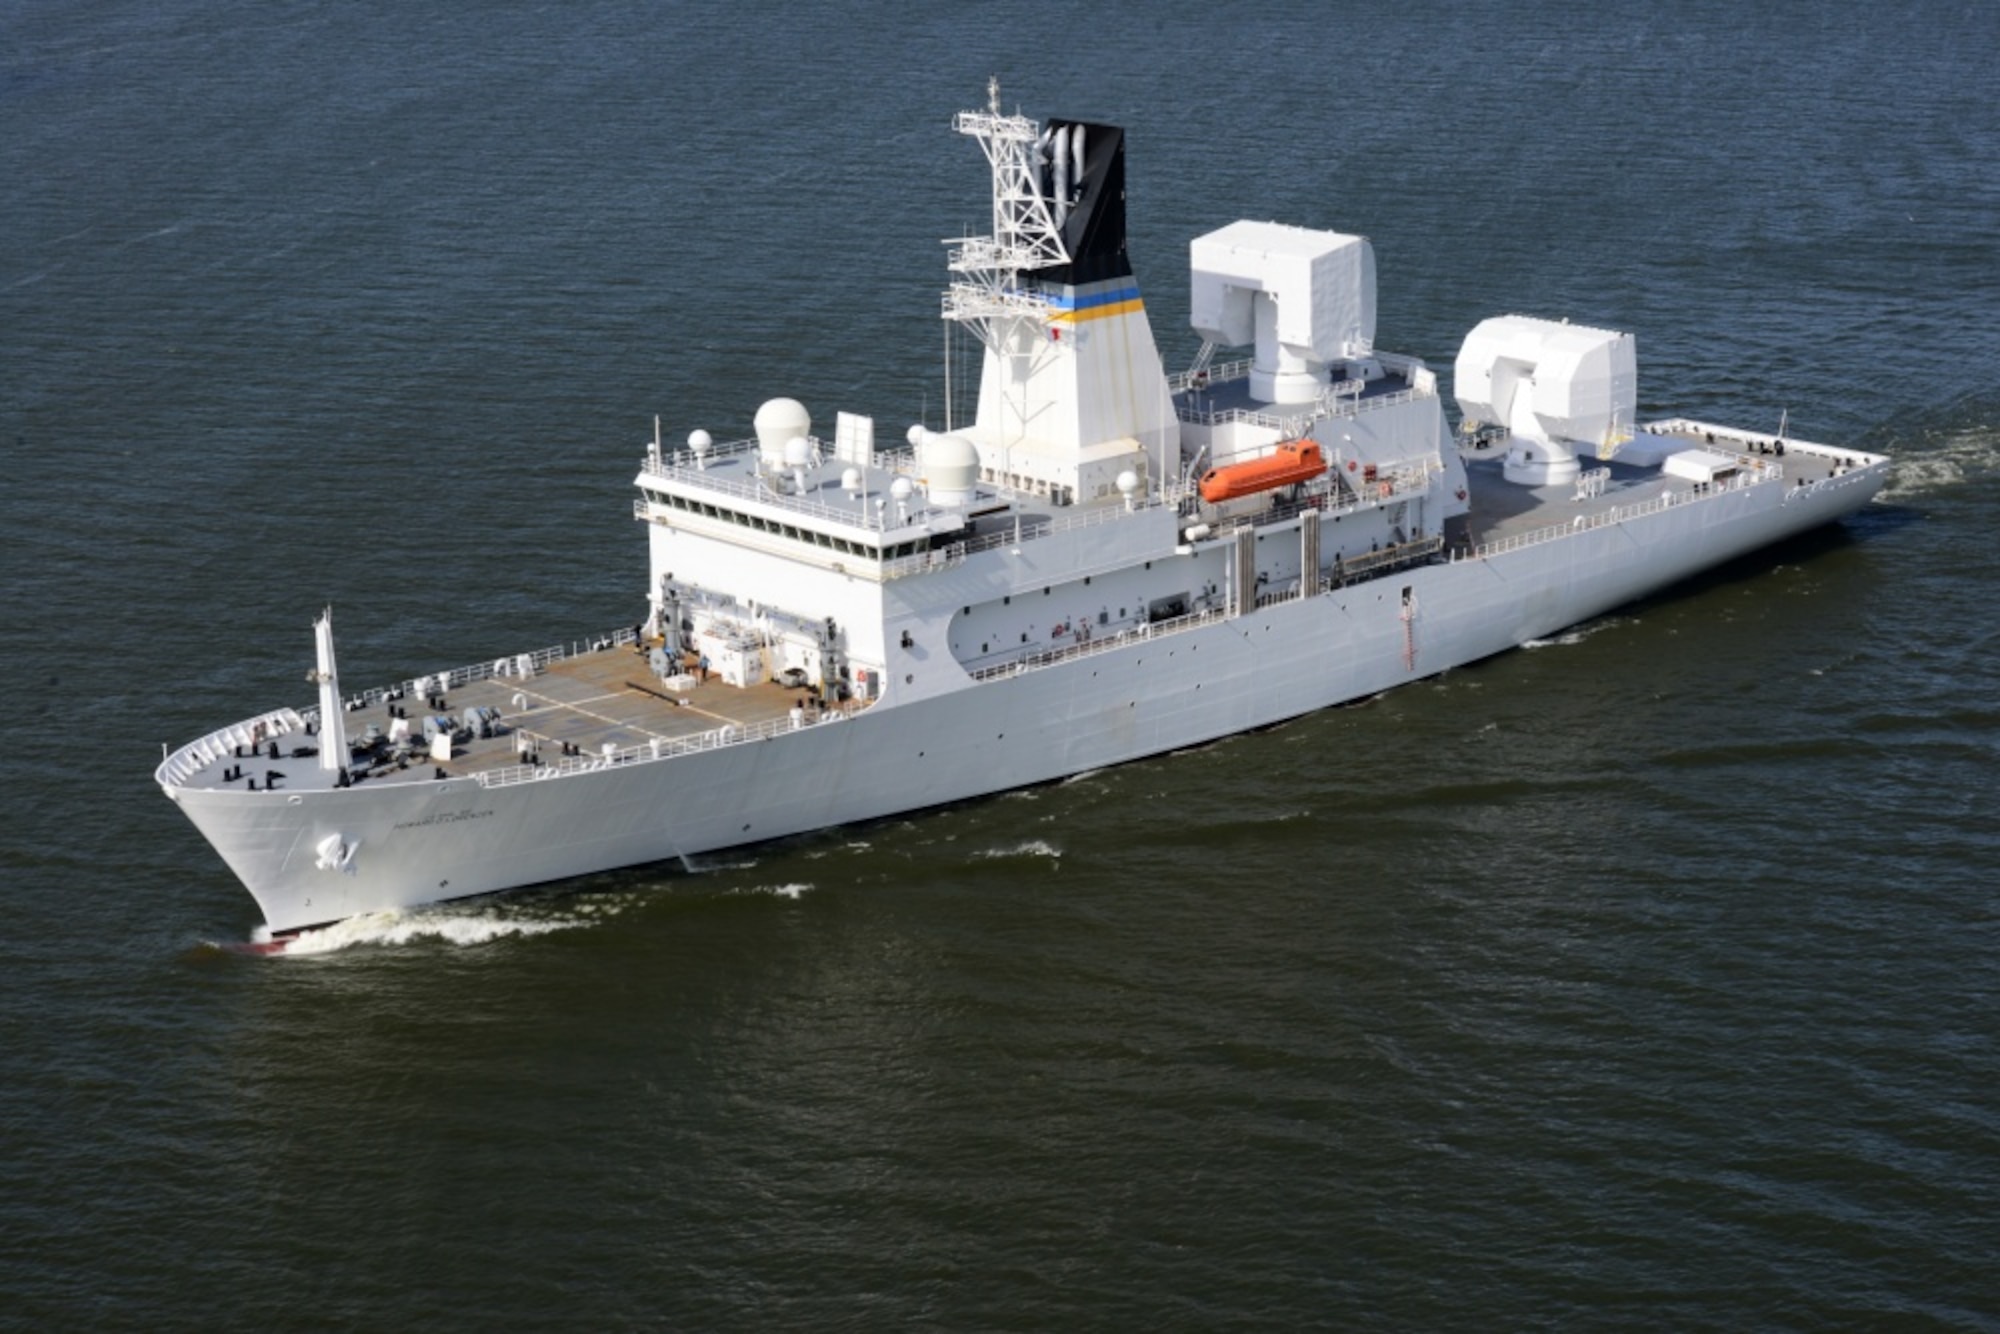 The USNS Howard O. Lorenzen (T-AGM-25) passes Astoria, Ore., as it departs the Columbia River into the Pacific Ocean, May 16, 2014. The USNS Howard O. Lorenzen is named for the late Naval Research Laboratory electrical engineer who was instrumental in the creation of the electronic intelligence capabilities of the United States. (U.S. Coast Guard photo by Petty Officer 1st Class David Mosley)